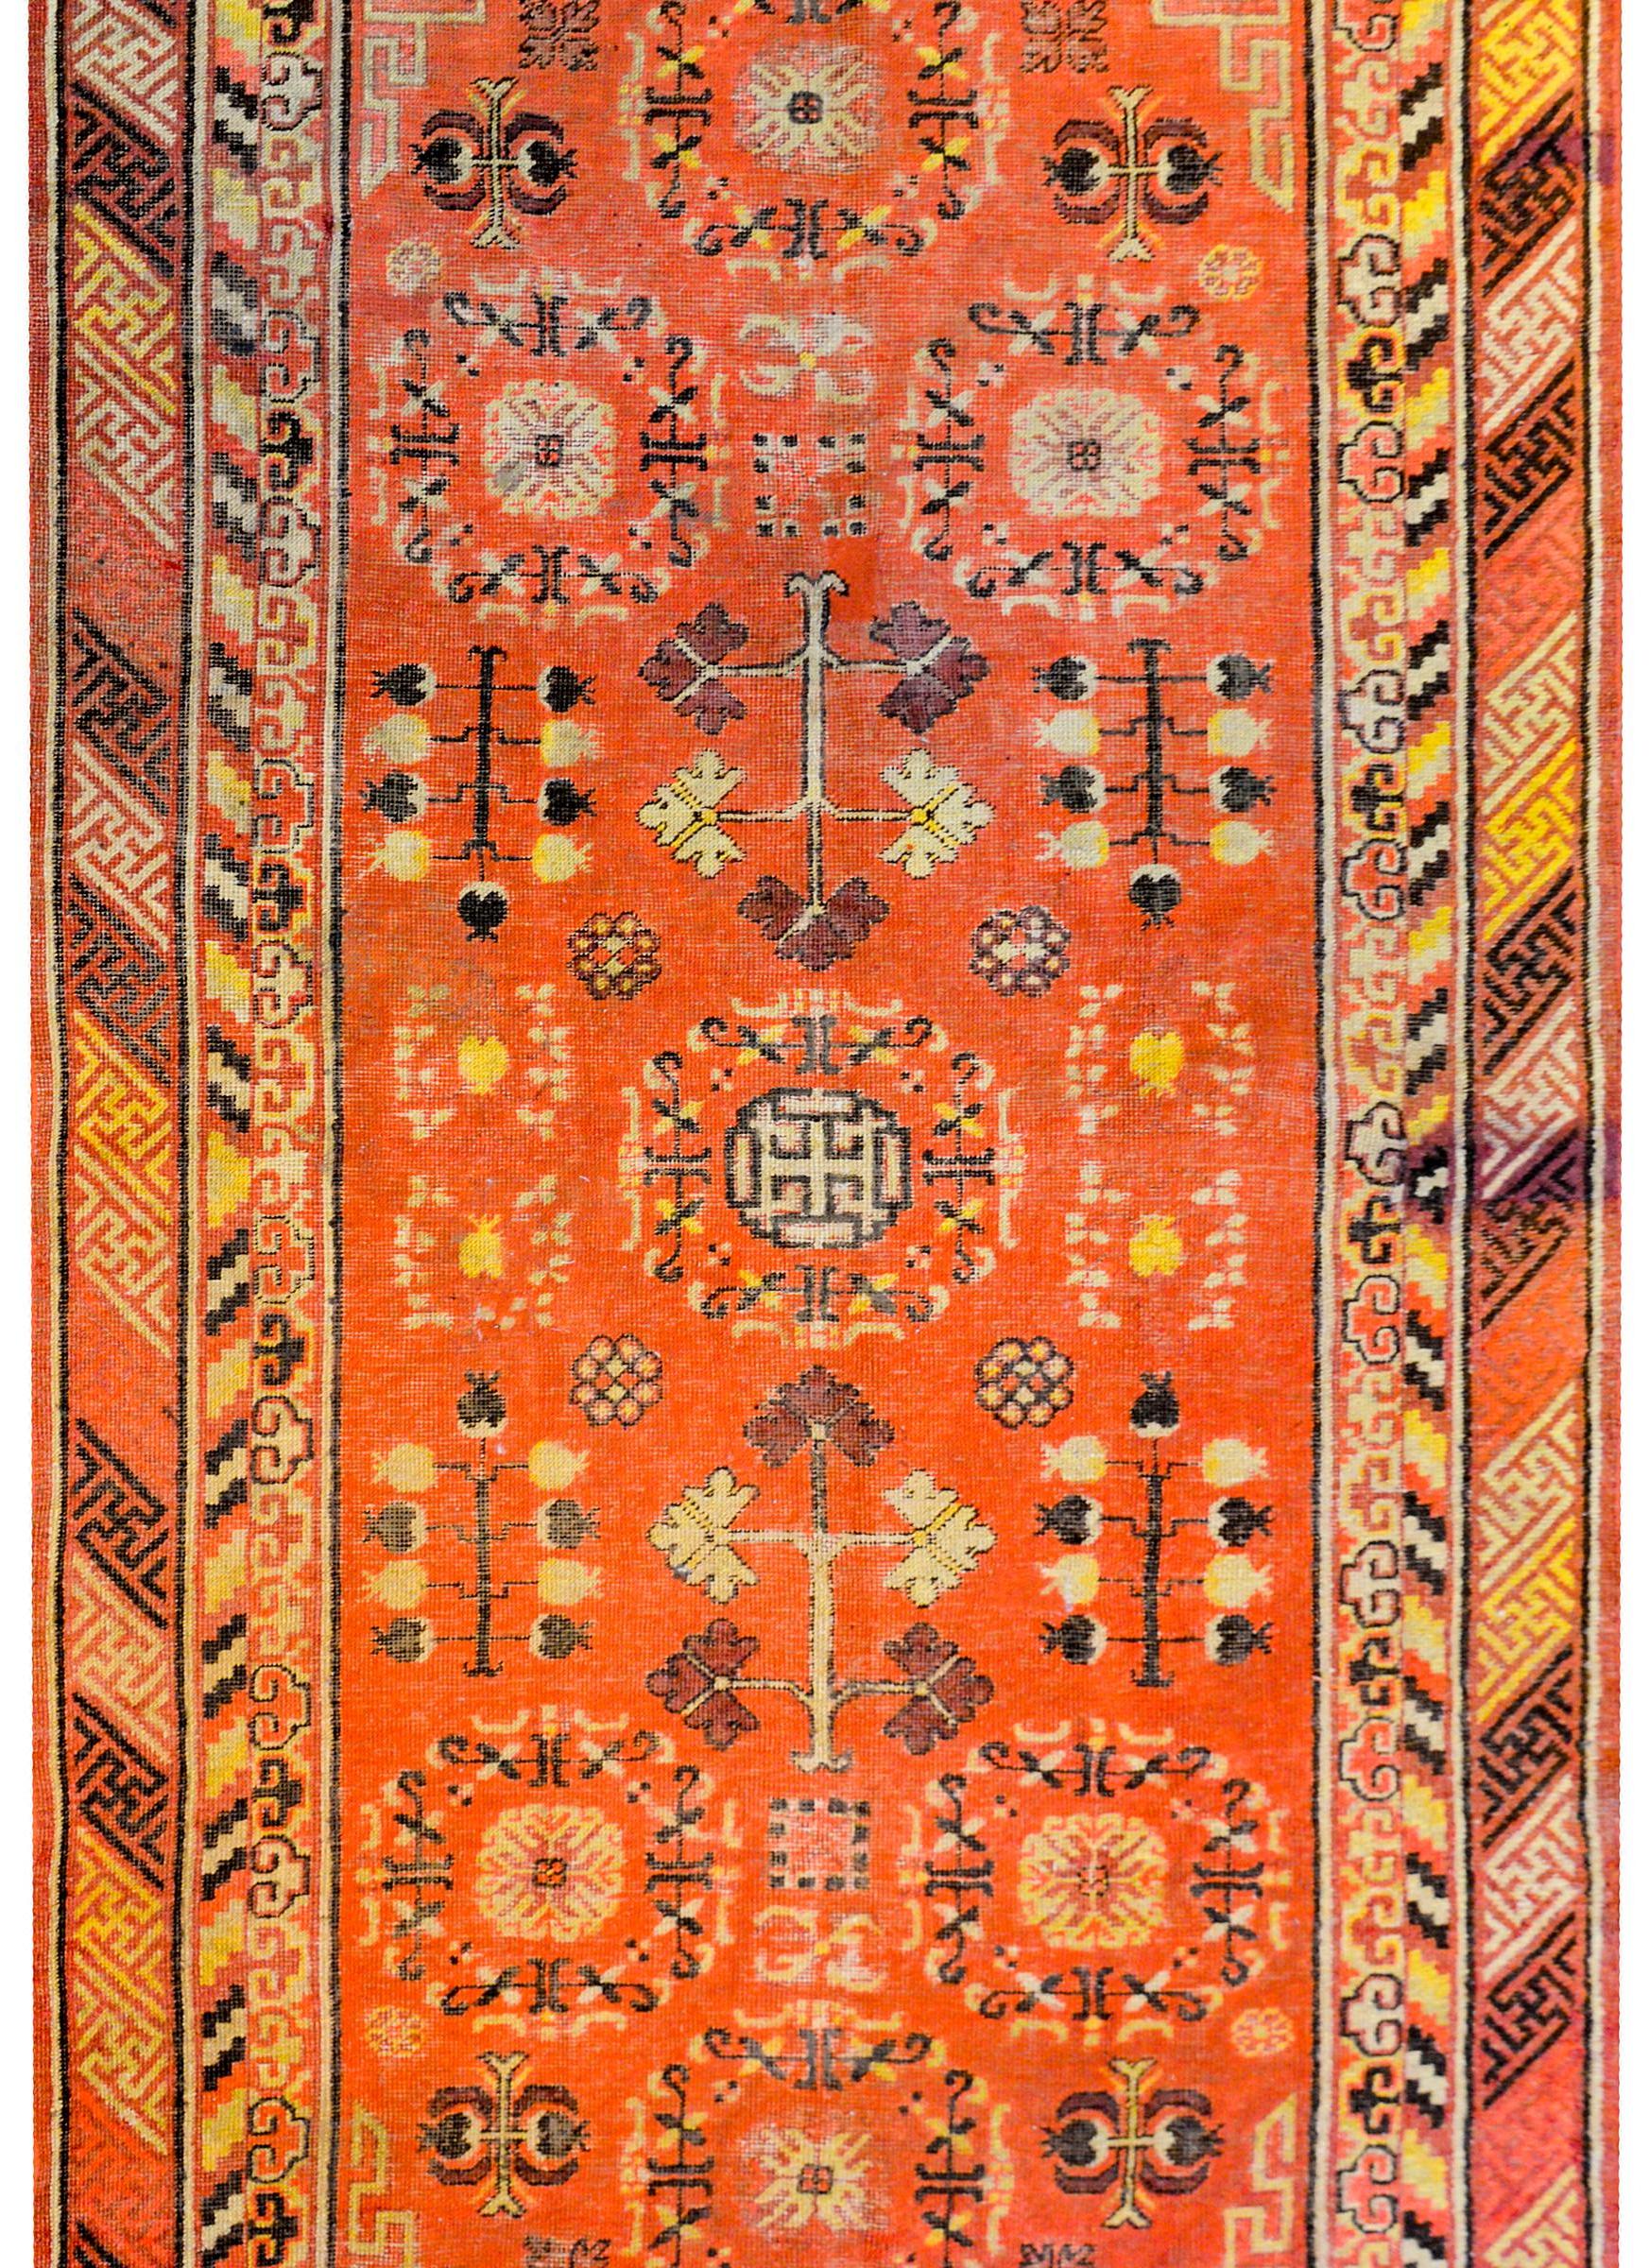 A wonderful early 20th century Central Asian Khotan rug with a beautiful central stylized floral medallion amidst a field of myriad flowers and trees-of-life on a gorgeous orange background. The border is complex with two distinct patterns, one with